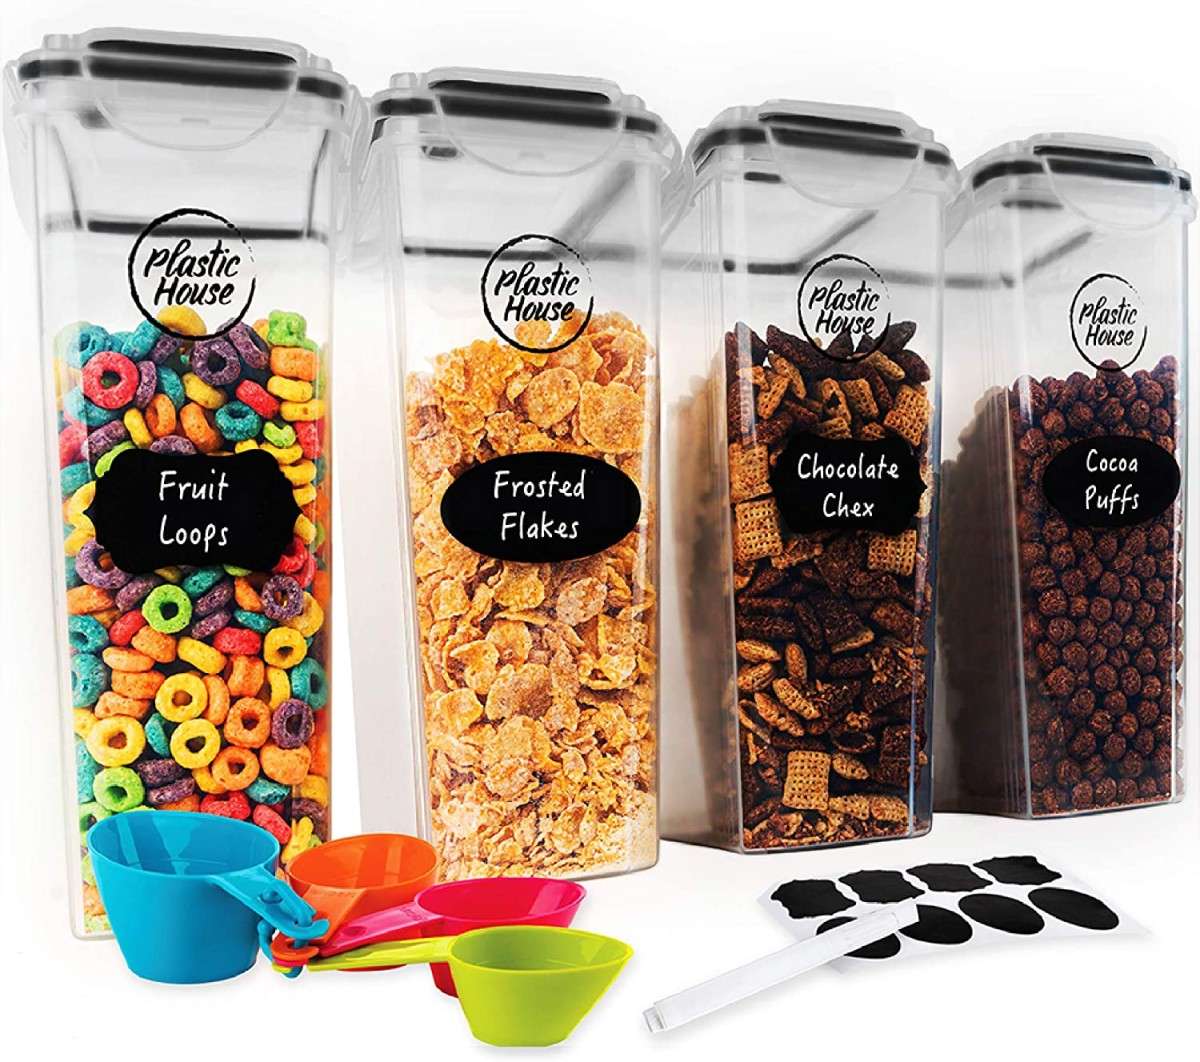 Alea's Deals (58% Off) 4ct Large Cereal Containers Storage Set! Was $35.95!  